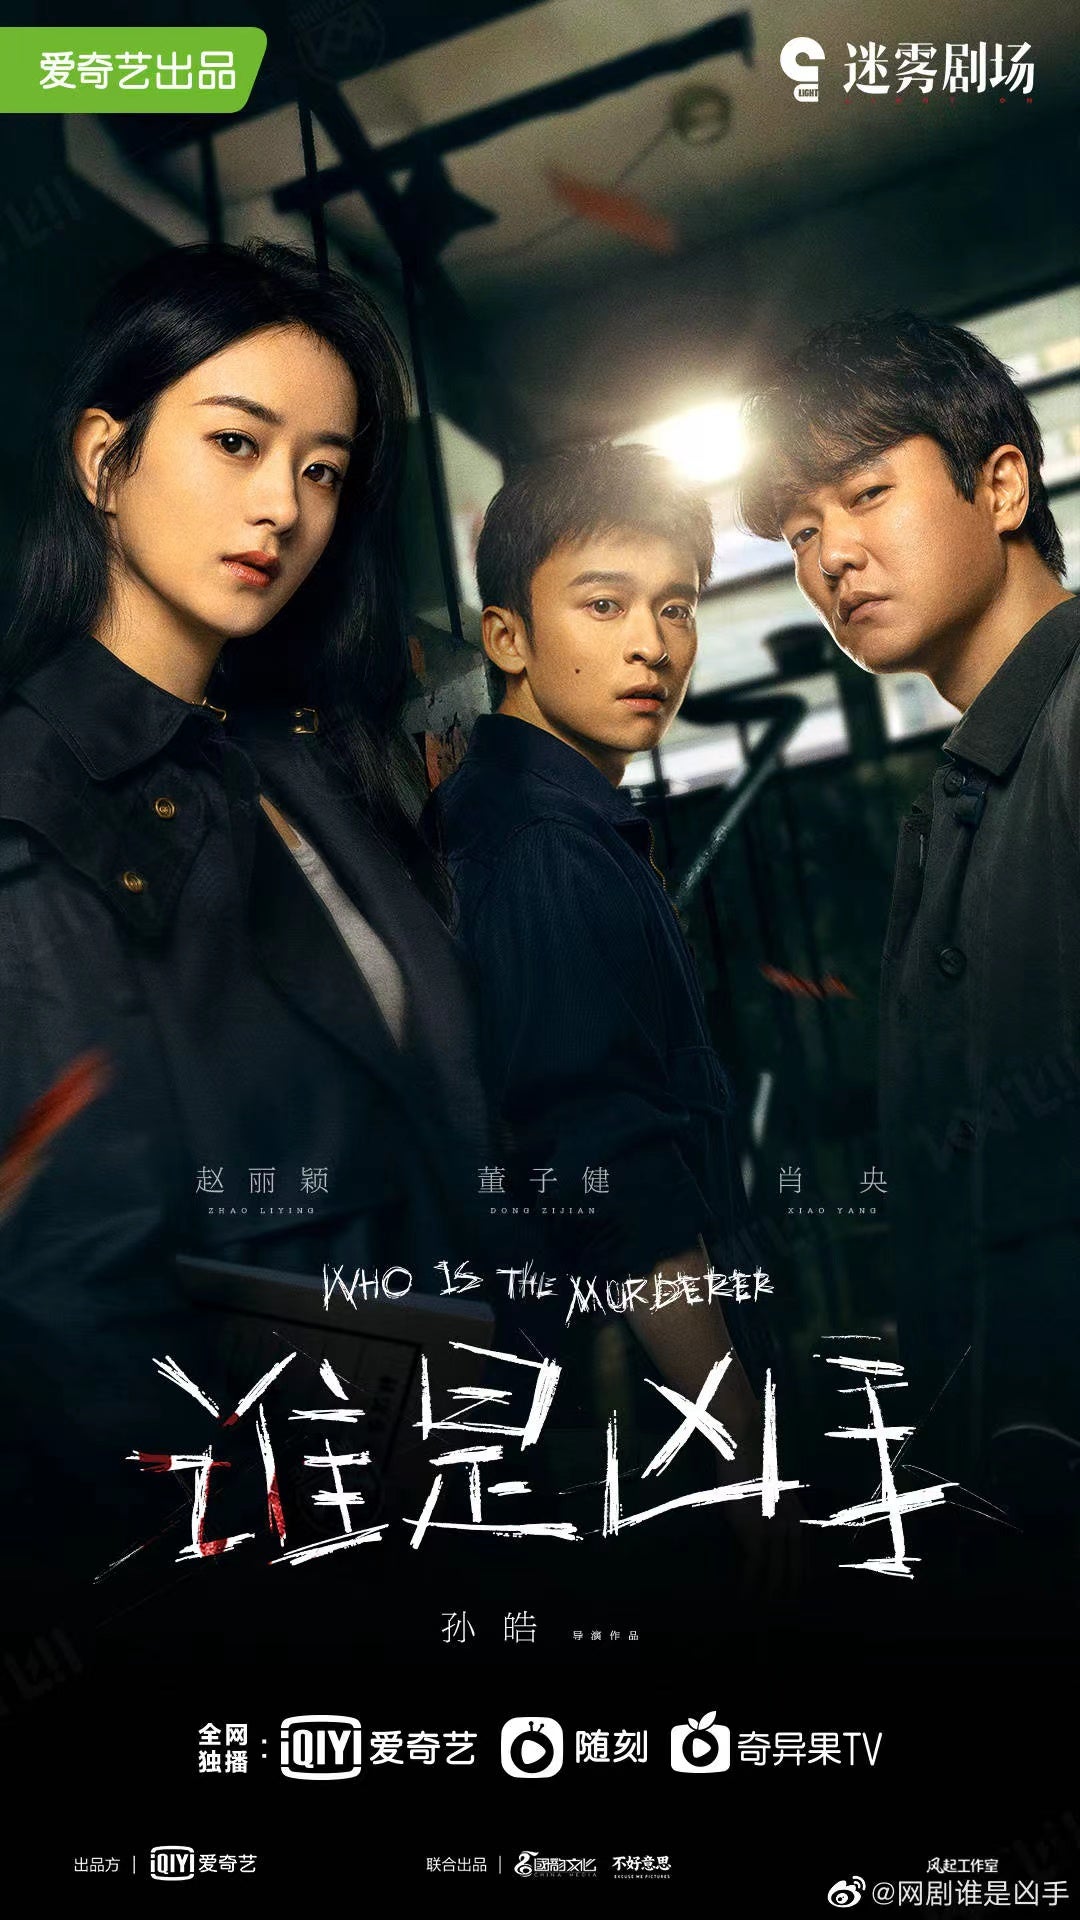 TV ratings for Who Is The Murderer (谁是凶手) in Mexico. iqiyi TV series